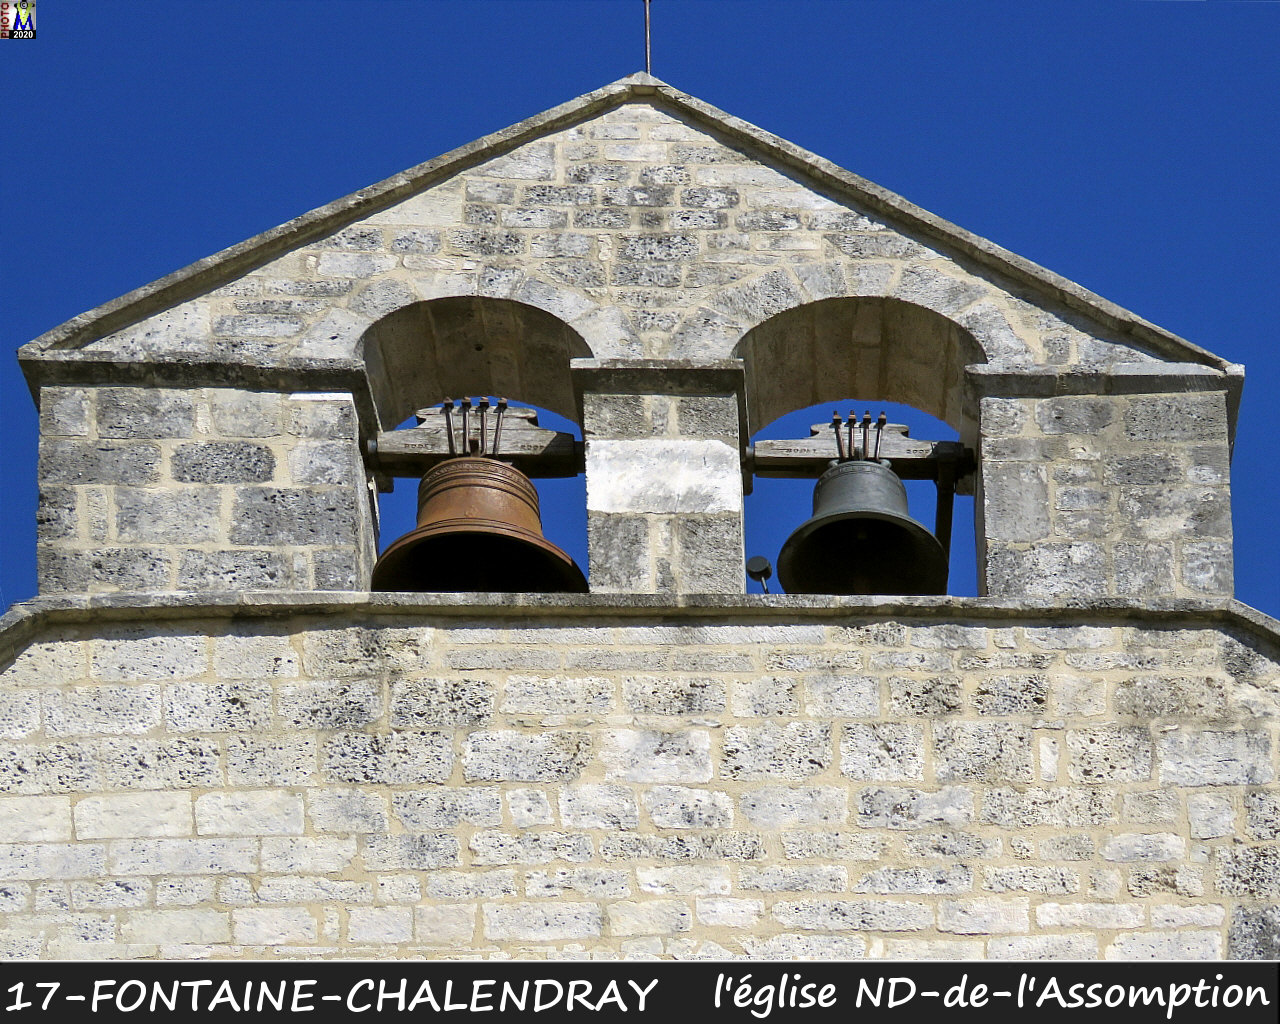 17FONTAINE-CHALENDRAY_eglise_1010.jpg